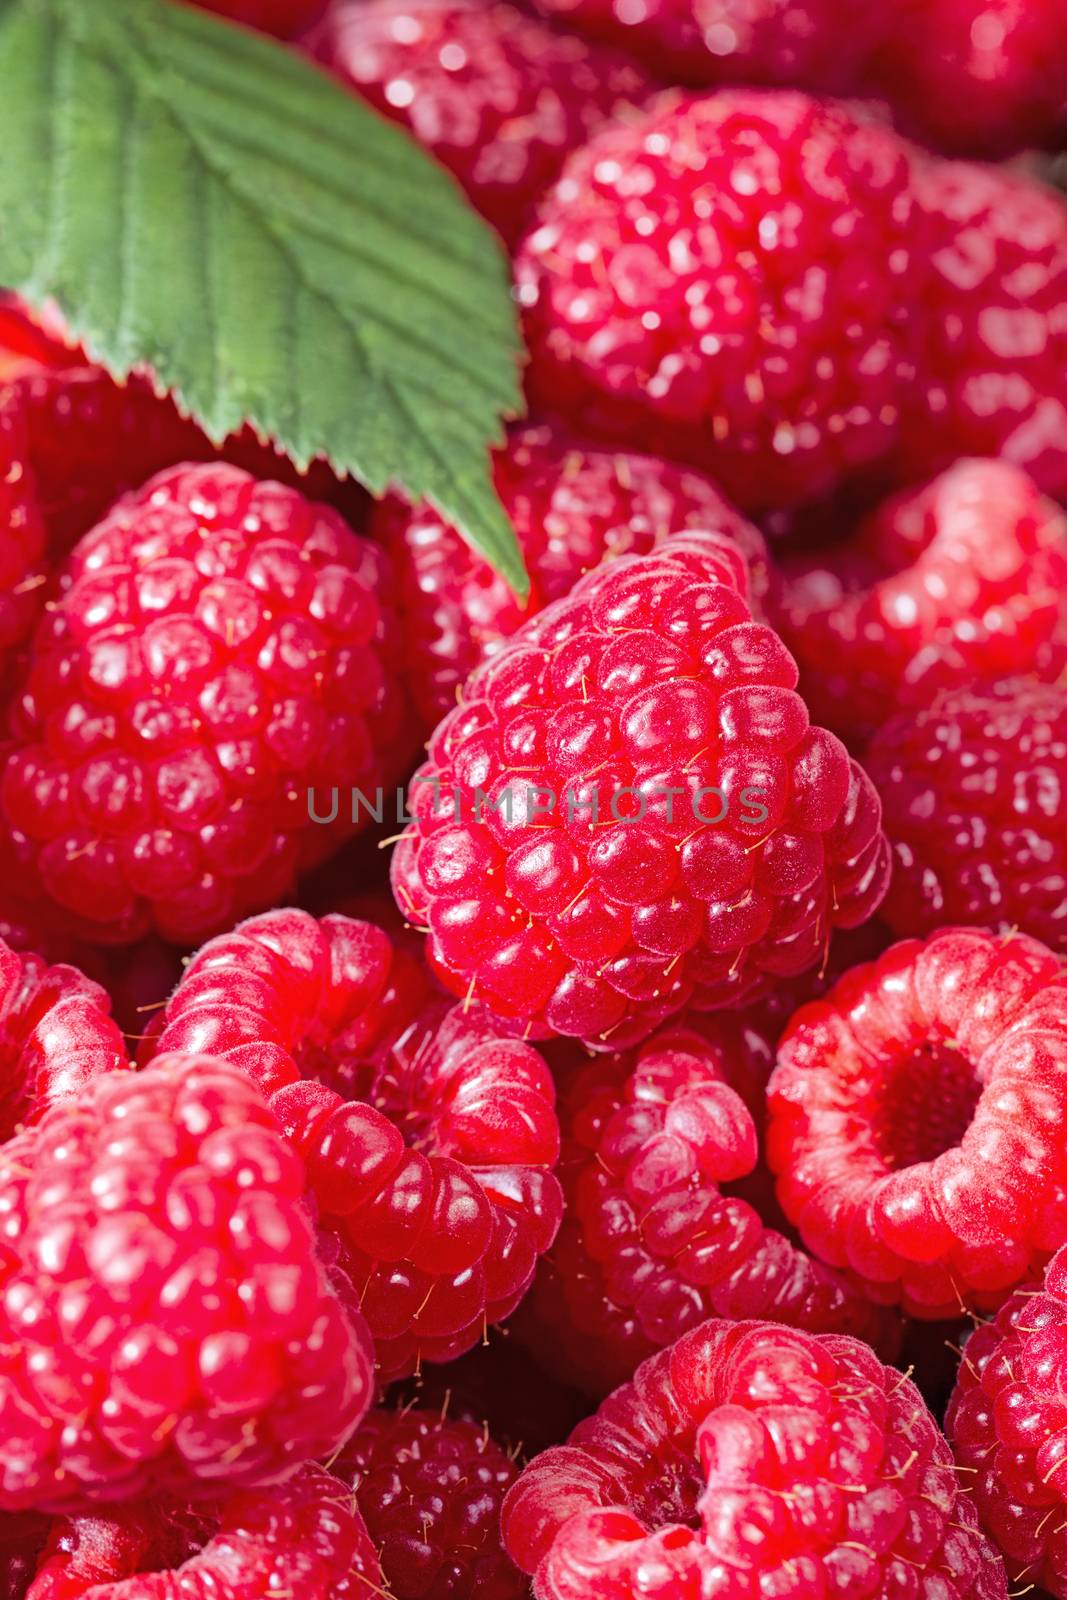 Vertical close up image of fresh Raspberries with focus on center berry